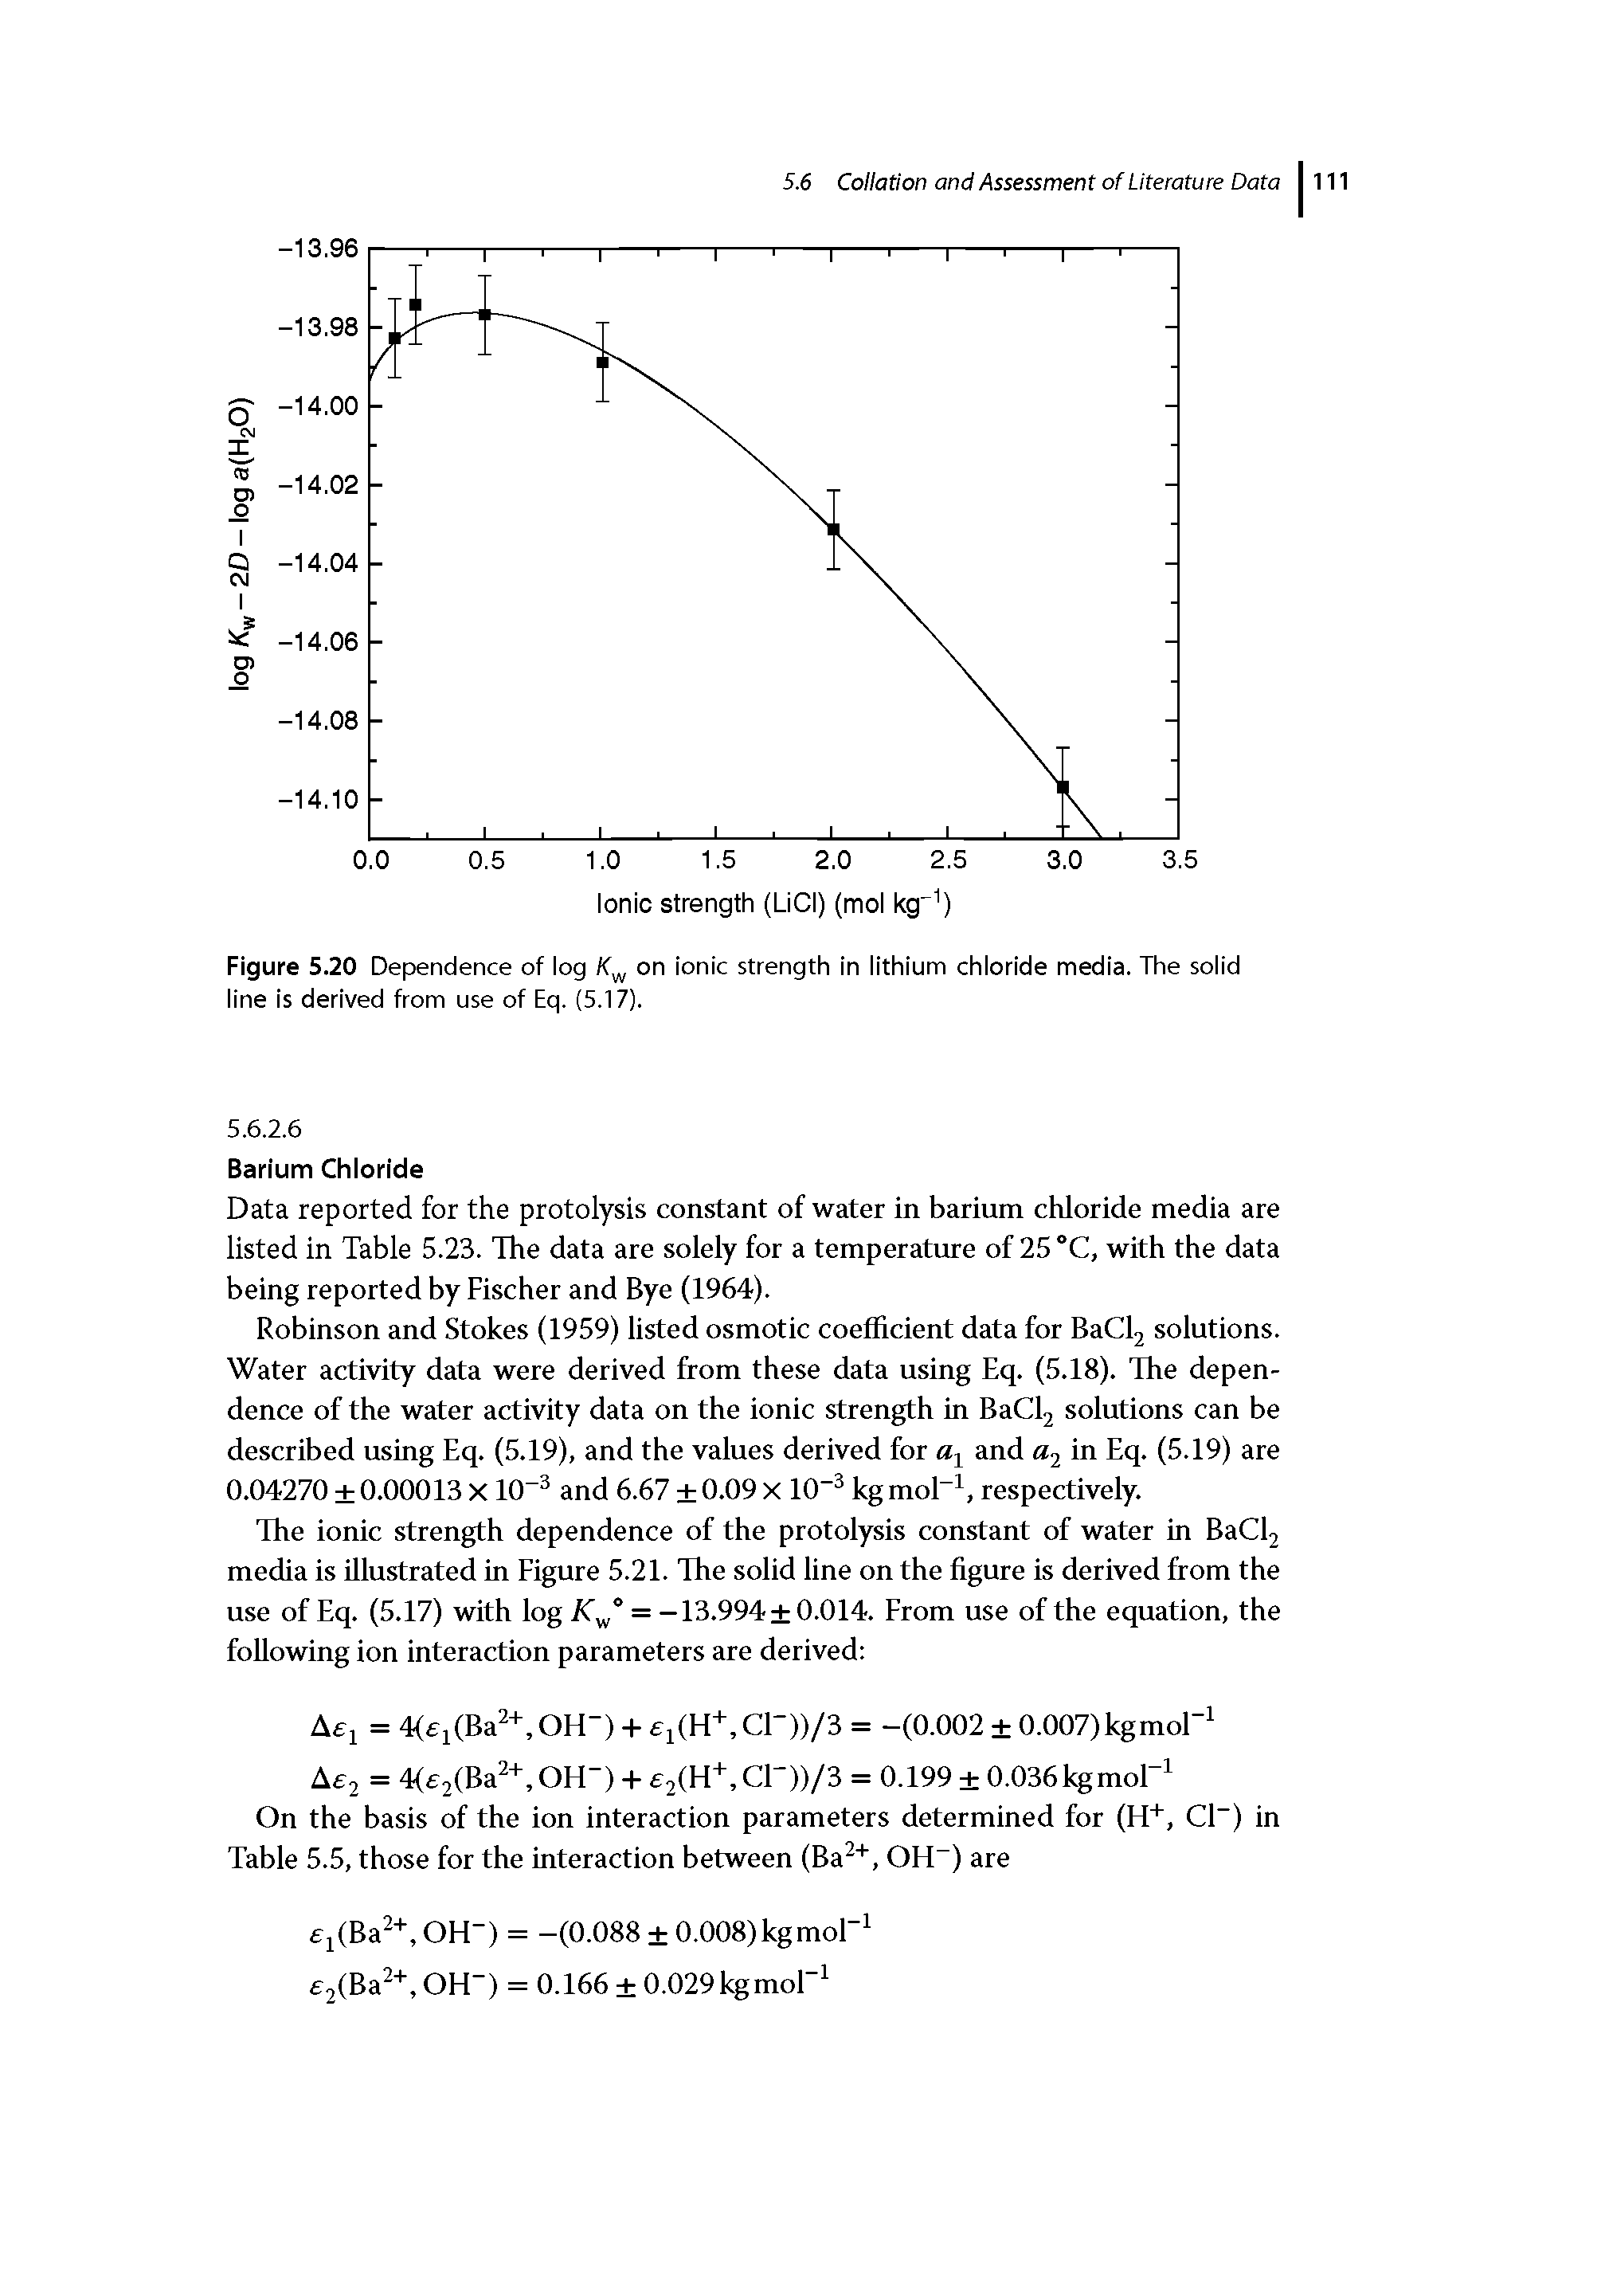 Figure 5.20 Dependence of log on ionic strength in lithium chloride media. The solid line is derived from use of Eq. (5.17).